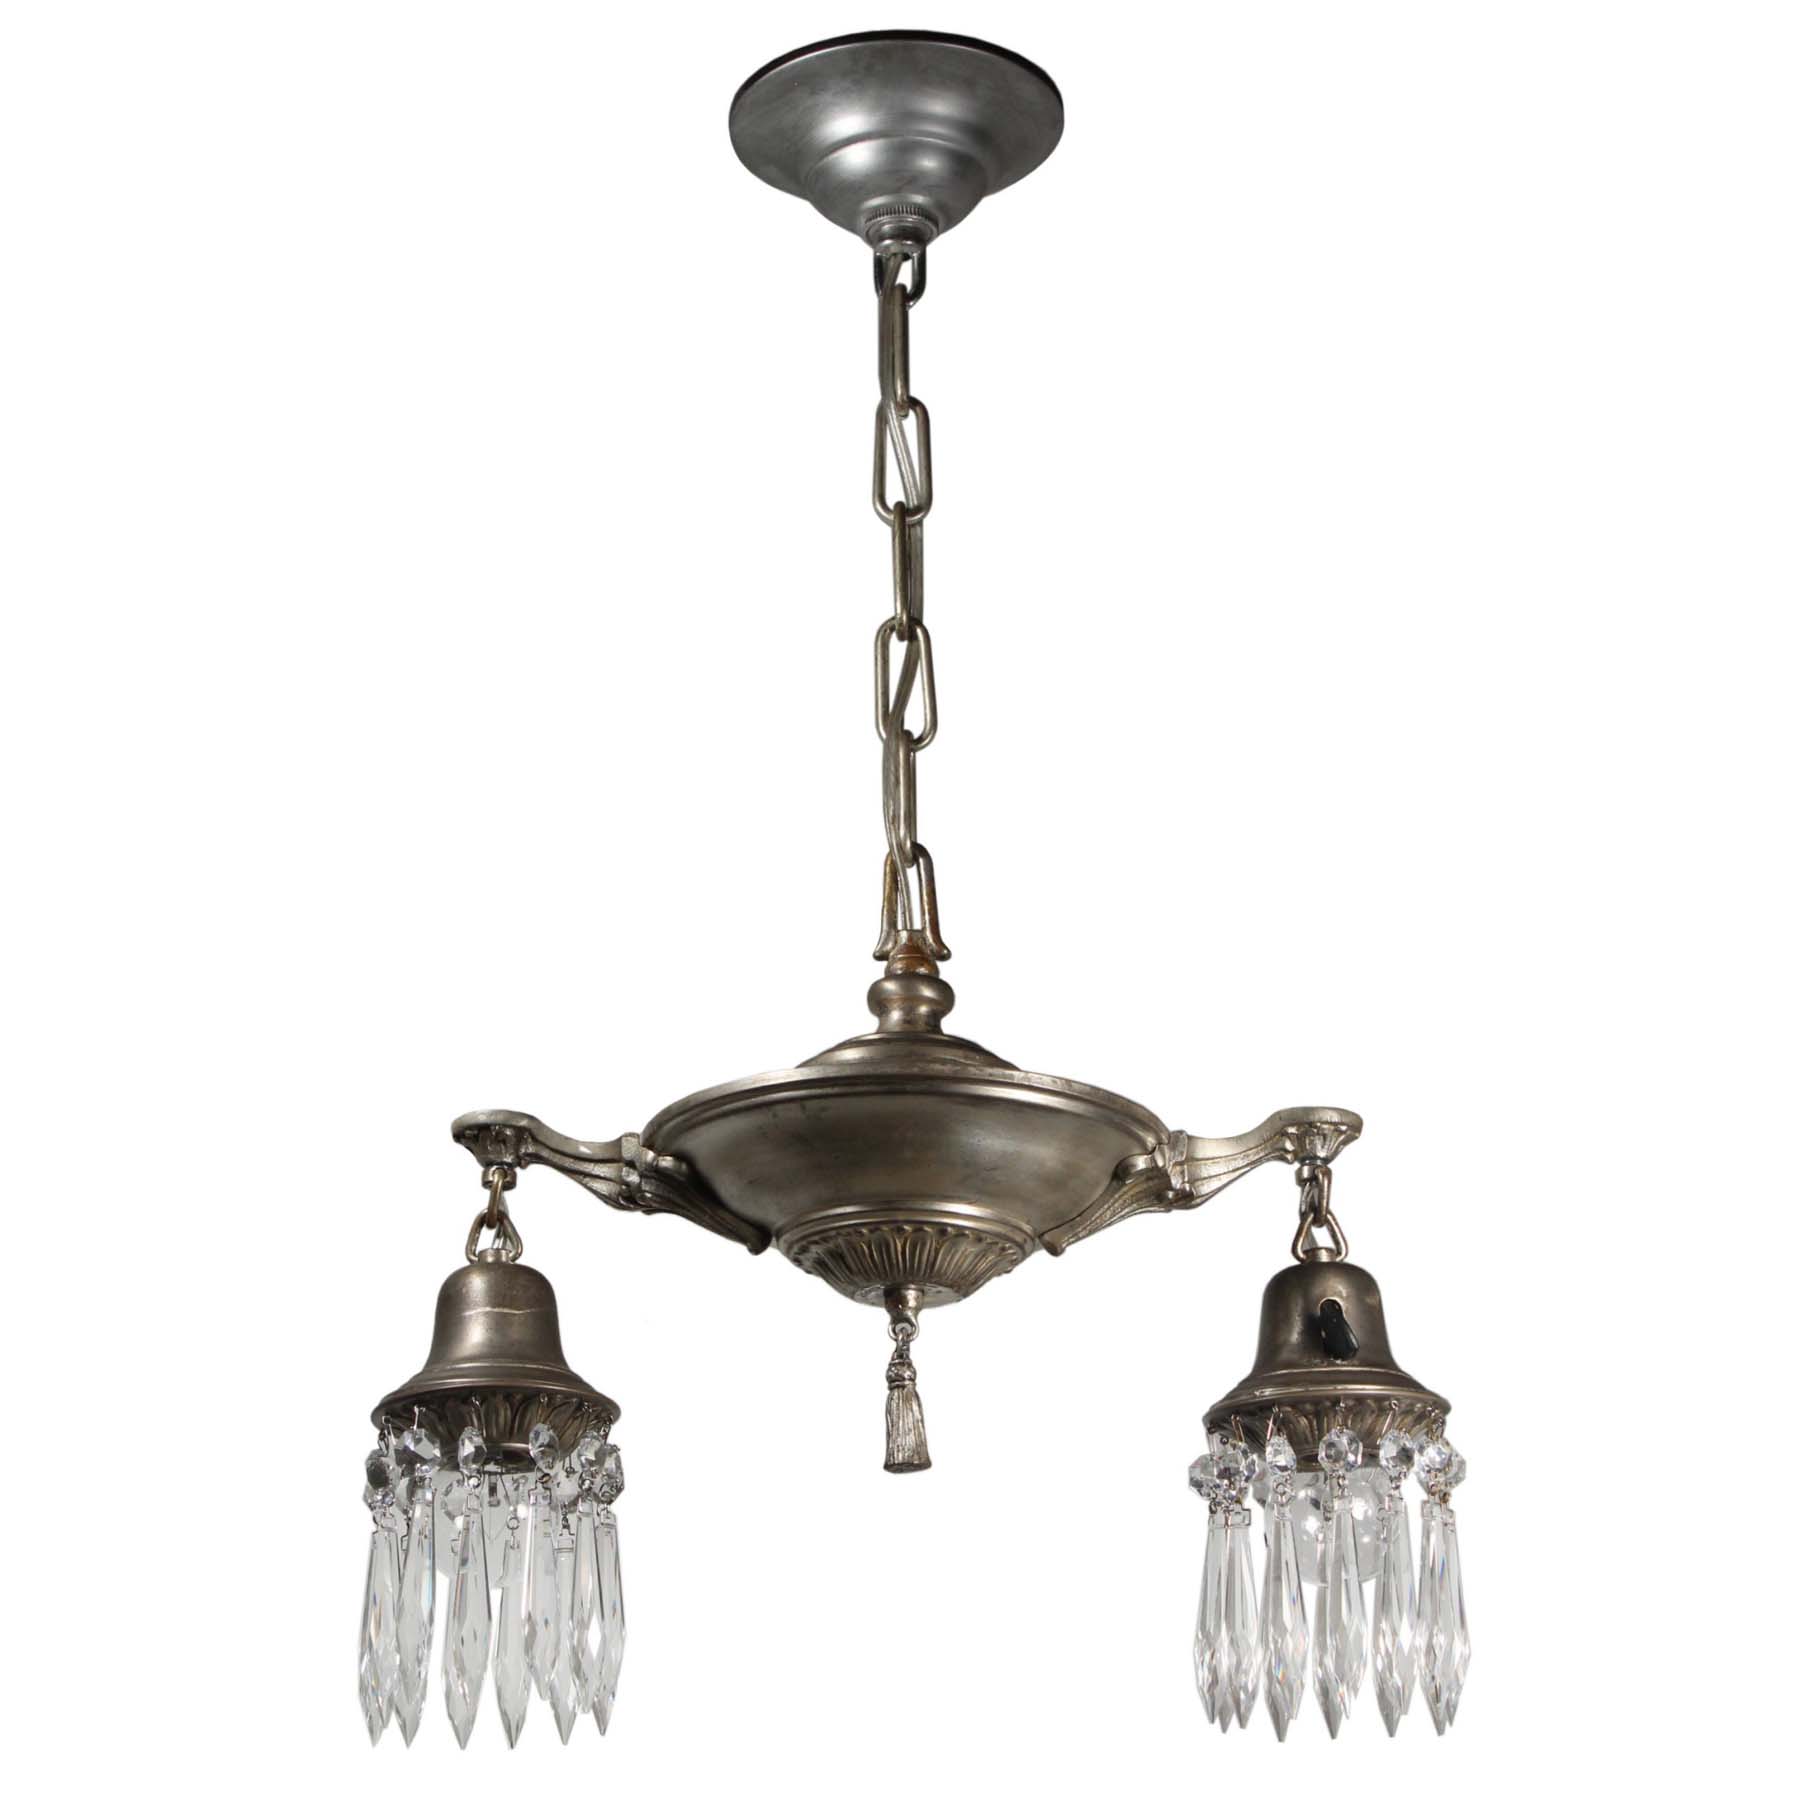 SOLD Neoclassical Silver Plated Chandelier with Prisms, Antique Lighting-67711